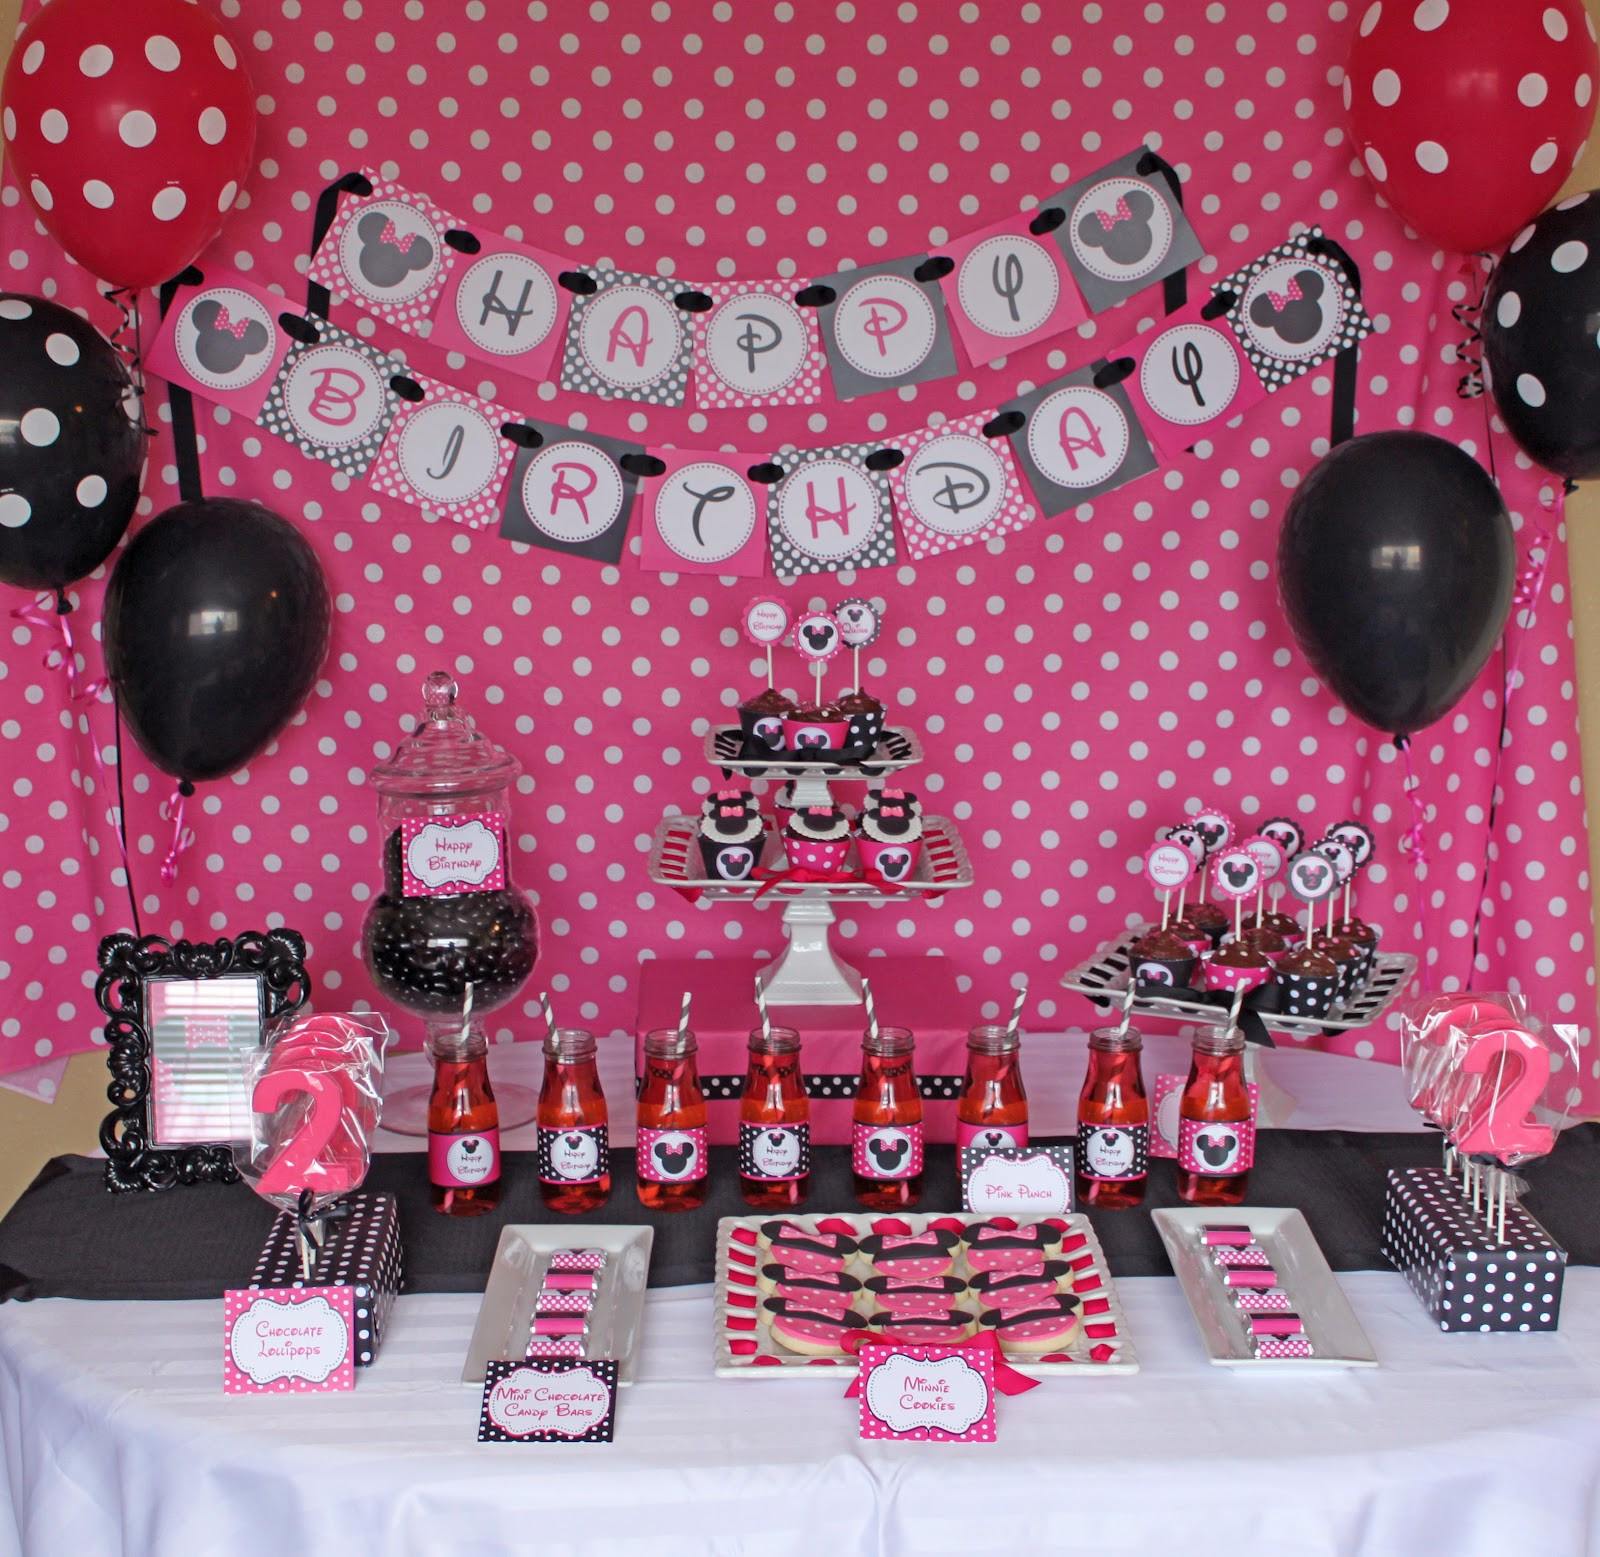 Minnie Mouse Birthday Decor
 Minnie Mouse Party Decorations